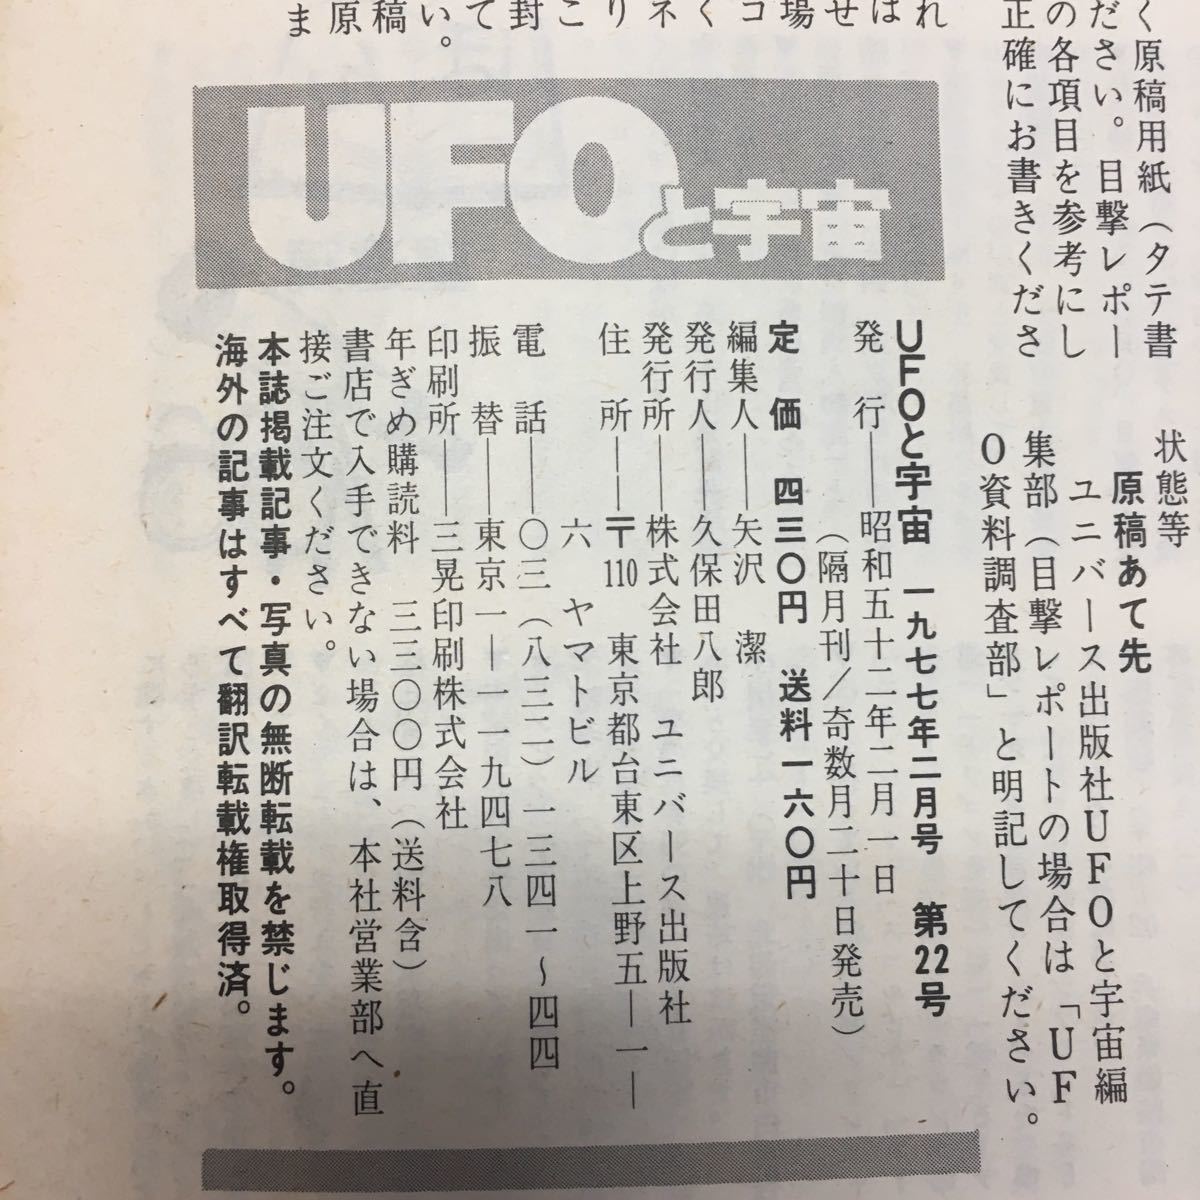 Y06-164 UFO. cosmos 1977/2 month number no.22 Showa era 52 year issue Universe publish company UFO is stone . meal ....chi bed mountain middle. gold star person basis ground ( height slope ..)